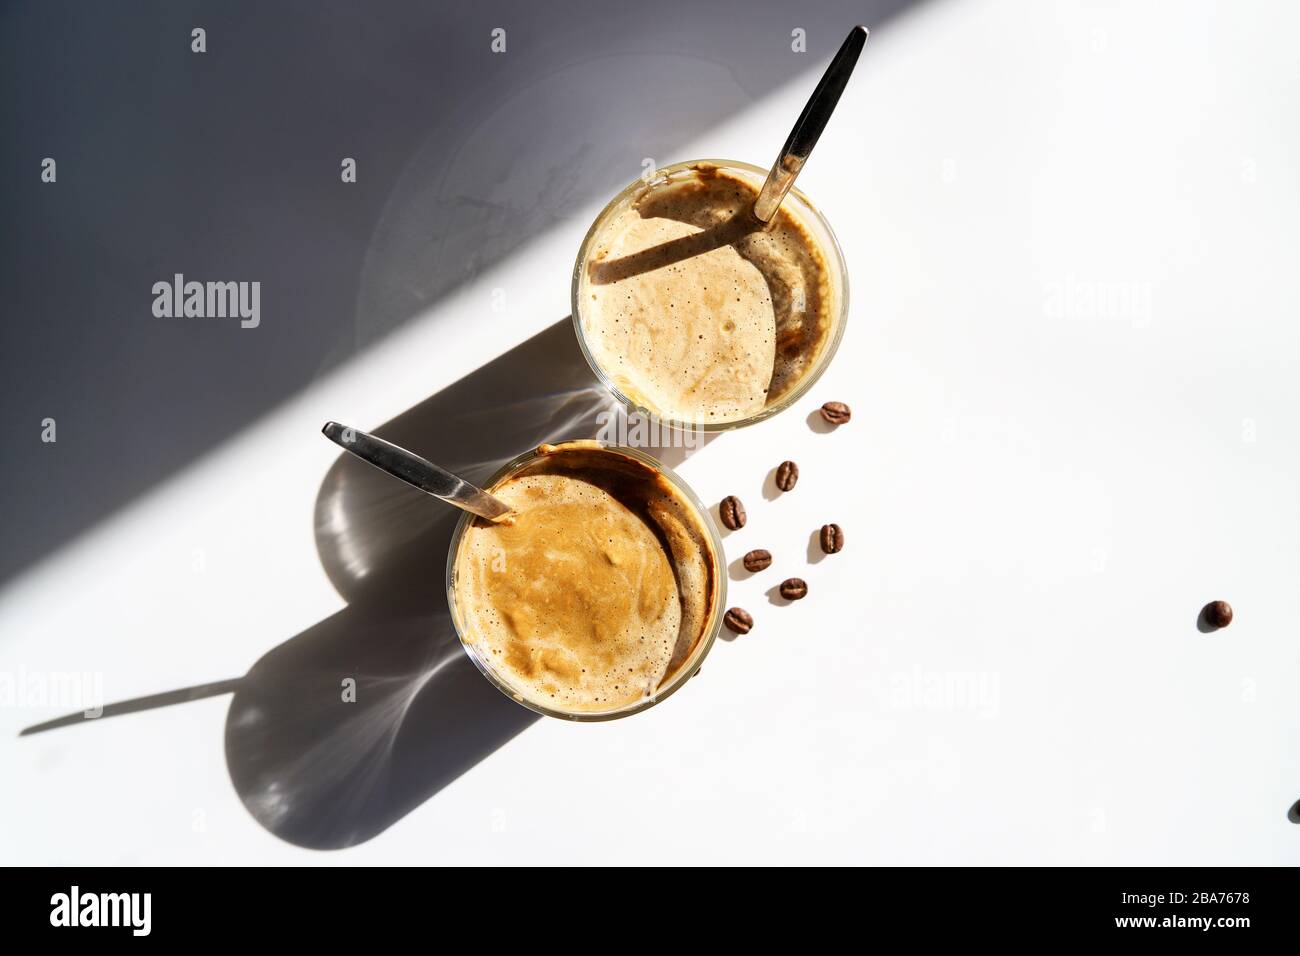 Cold coffee – latte, cappuccino or dalgona. Summer trendy drink with whipped milk, top view Stock Photo